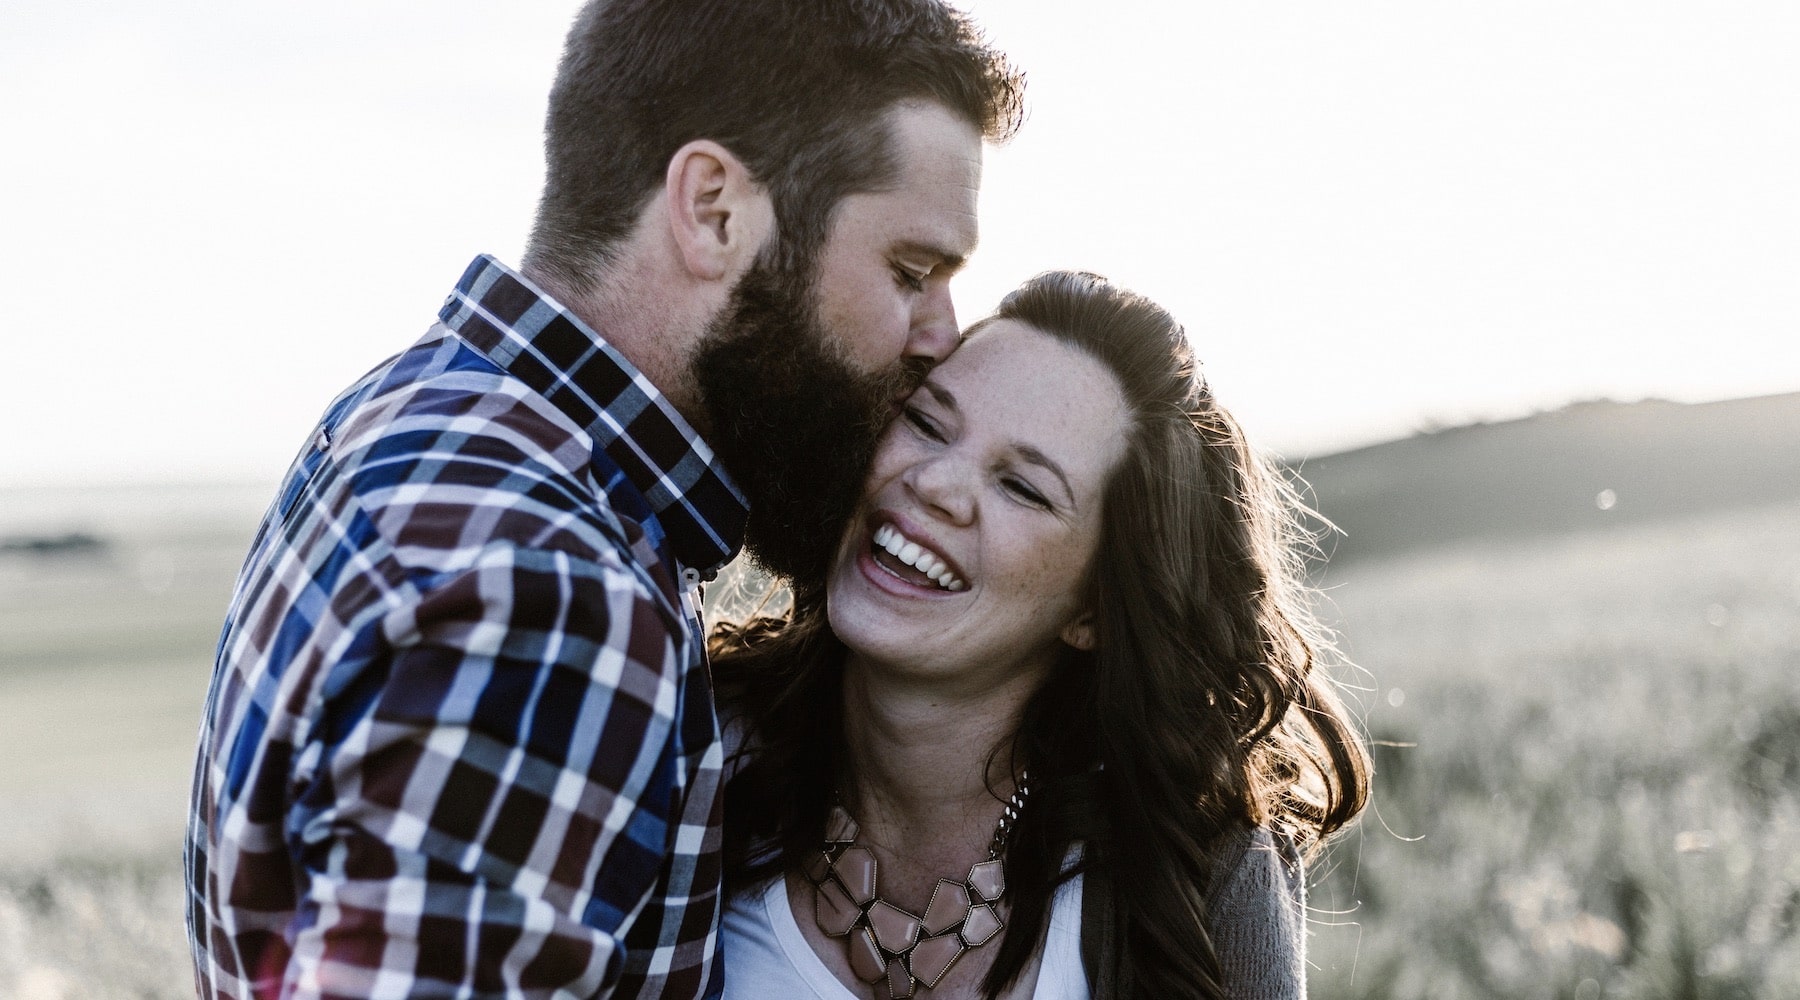 bearded man kissing a laughing woman on the cheek